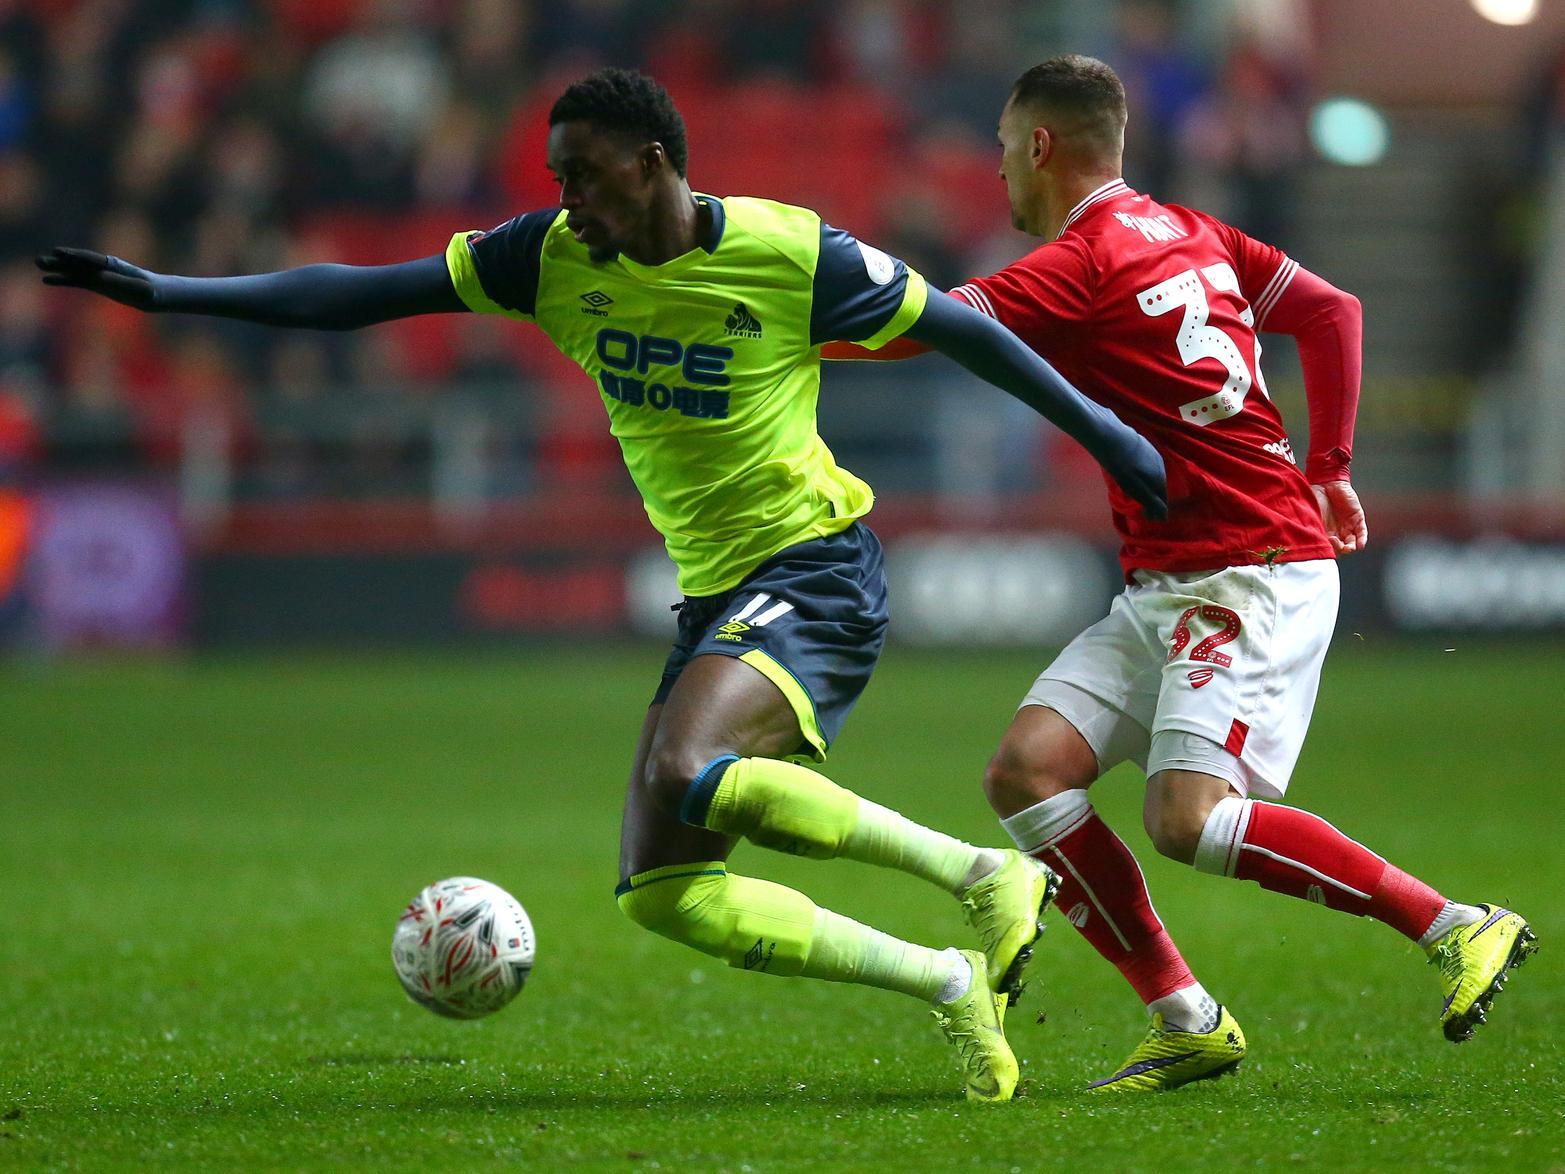 Nottingham Forest have completed the signing of Huddersfield Town's Adama Diakhaby on loan until the end of the season. The 23-year-old was previously on the books at Ligue 1 outfit Monaco. (BBC Sport). (L'Equipe)